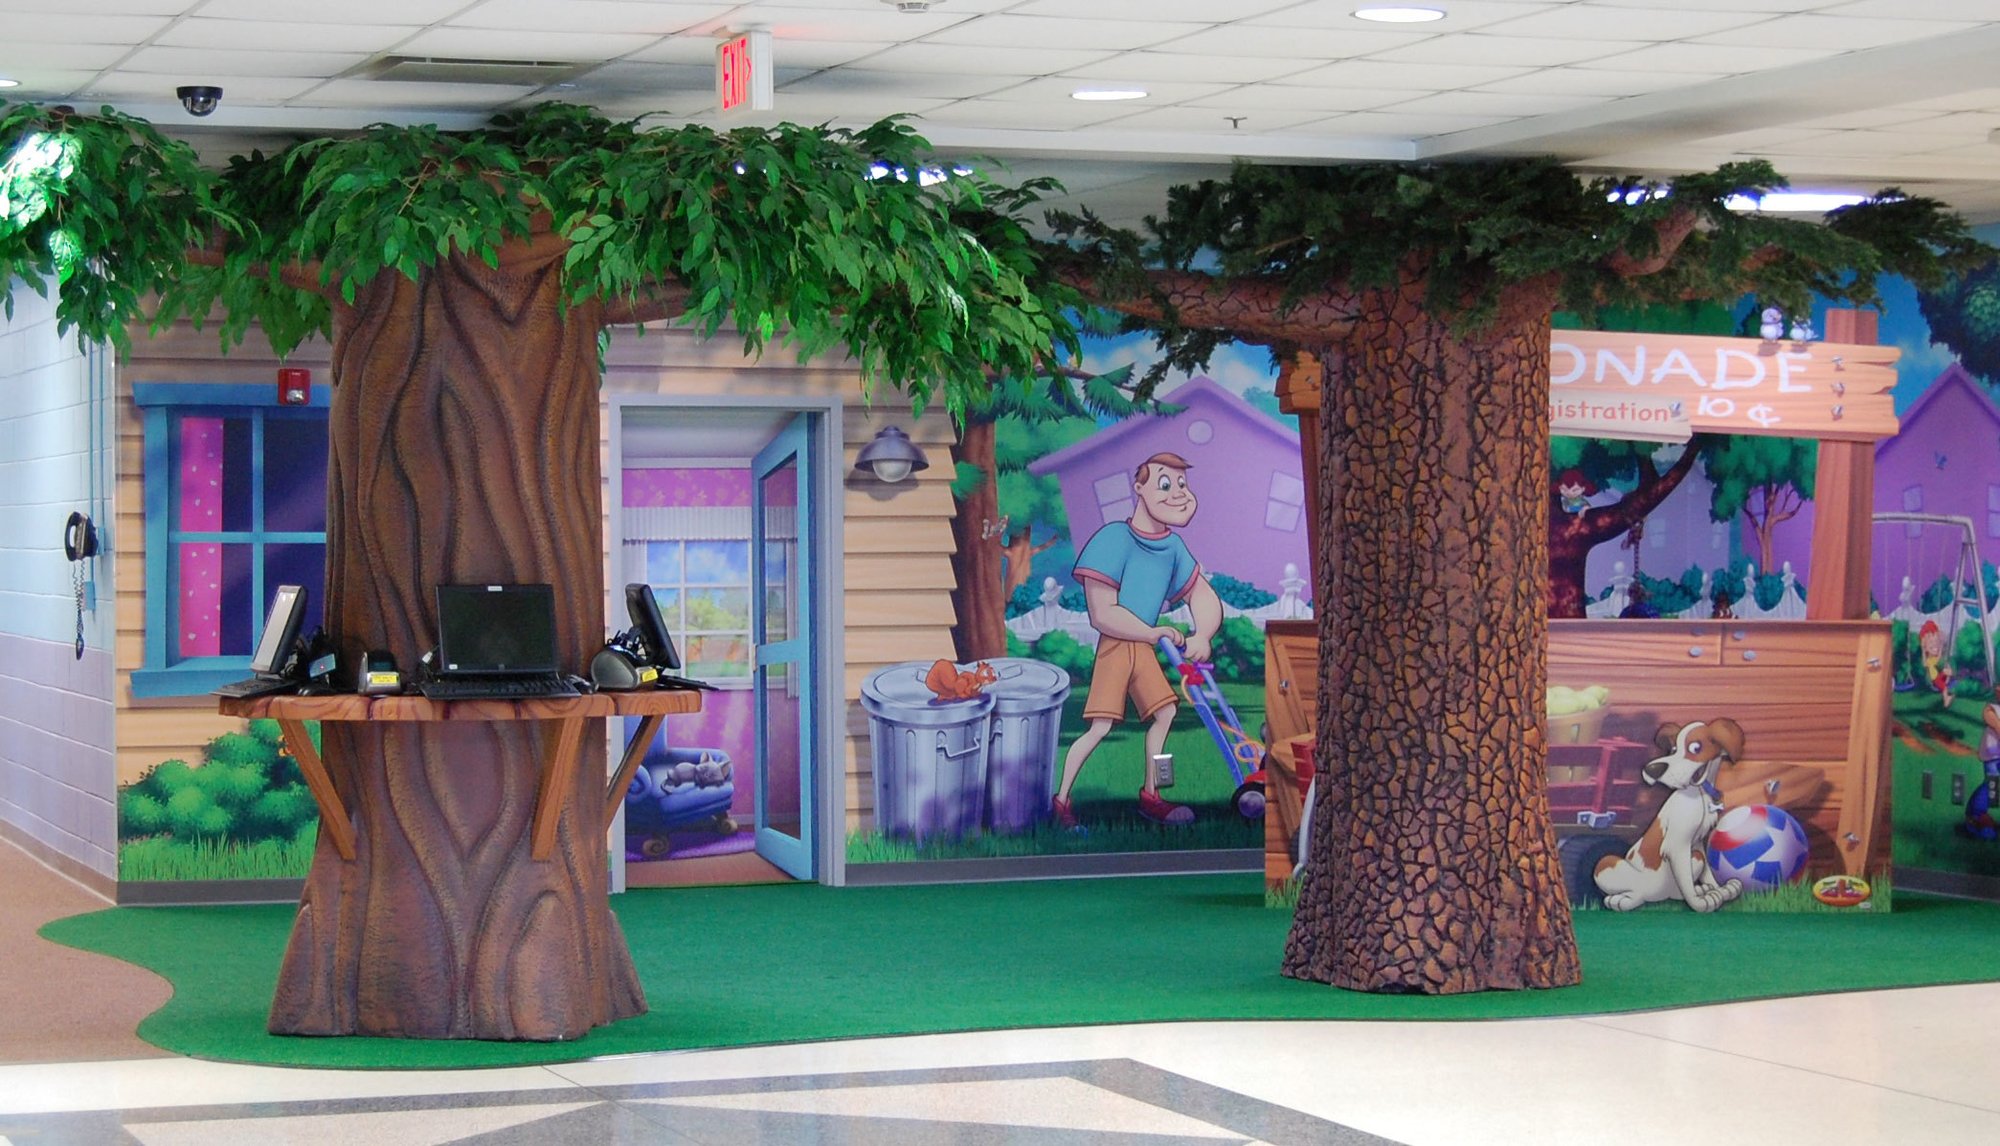 2 3D sculpted trees as check in desks, a faux grass floor plus a wall mural neighborhood scene with a yellow house, a man mowing grass and a lemonade stand with a dog in front.